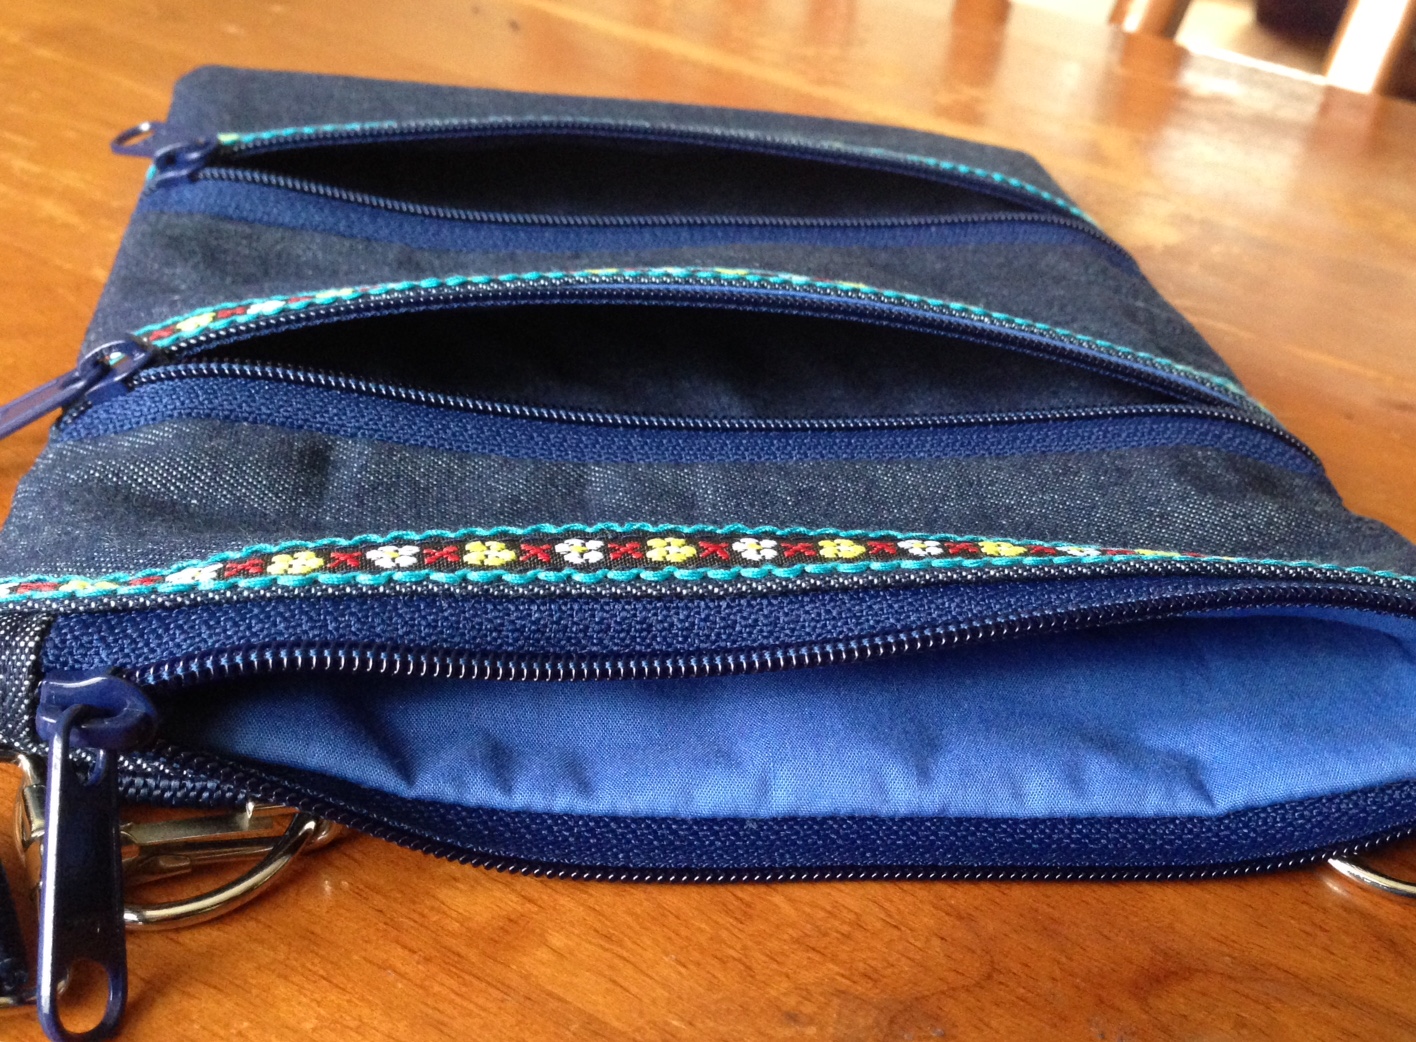 Double Zipper Crossbody Bag Pattern | Confederated Tribes of the Umatilla Indian Reservation